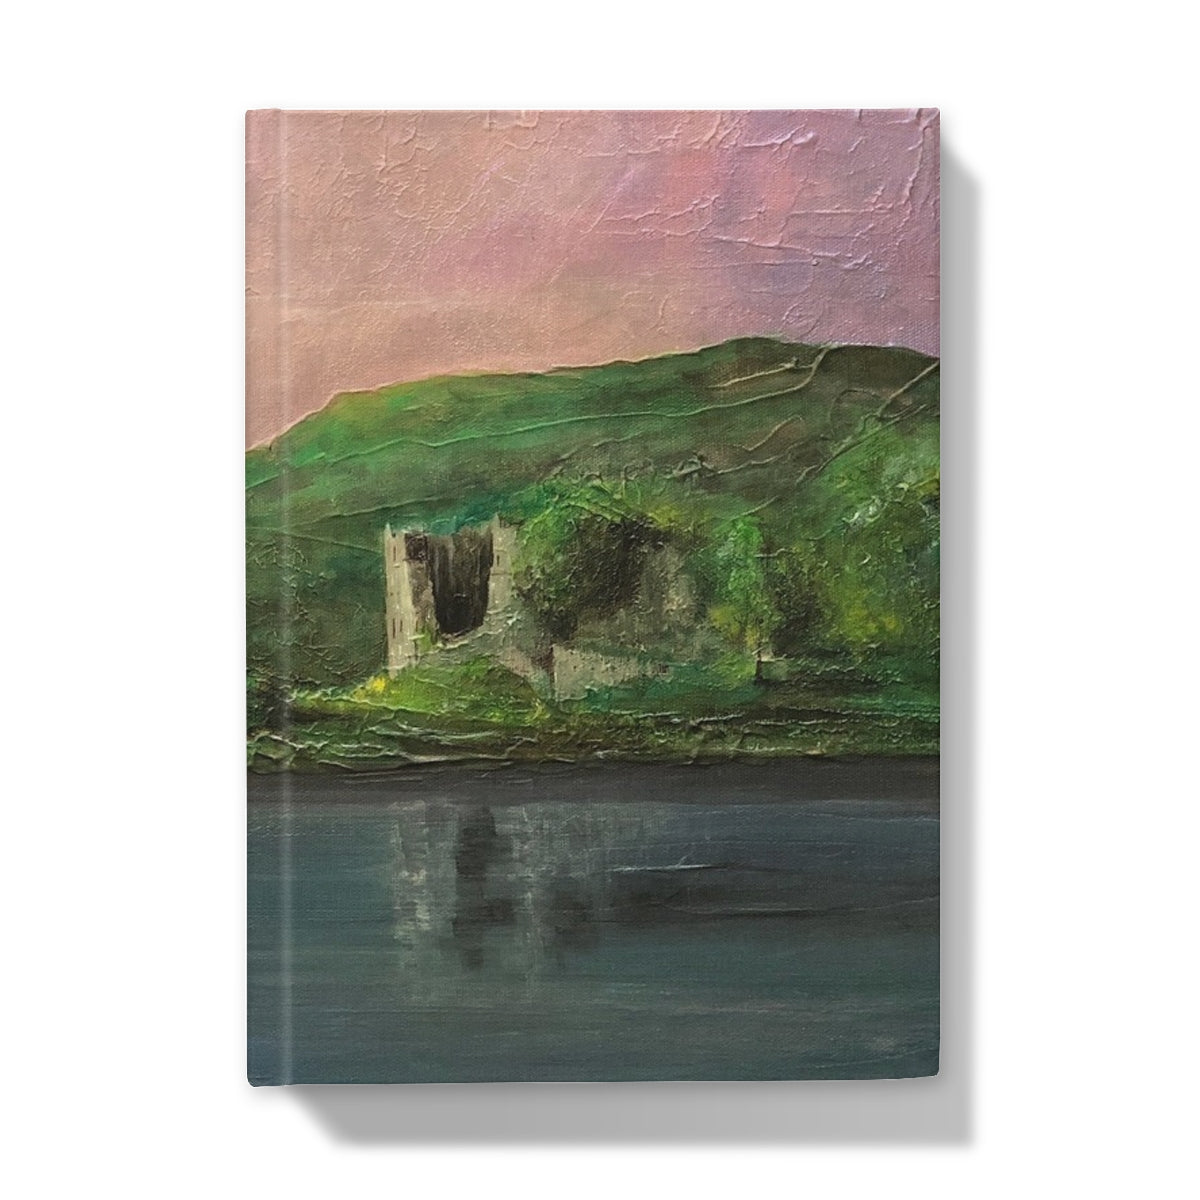 Old Castle Lachlan Art Gifts Hardback Journal-Journals & Notebooks-Historic & Iconic Scotland Art Gallery-5"x7"-Lined-Paintings, Prints, Homeware, Art Gifts From Scotland By Scottish Artist Kevin Hunter